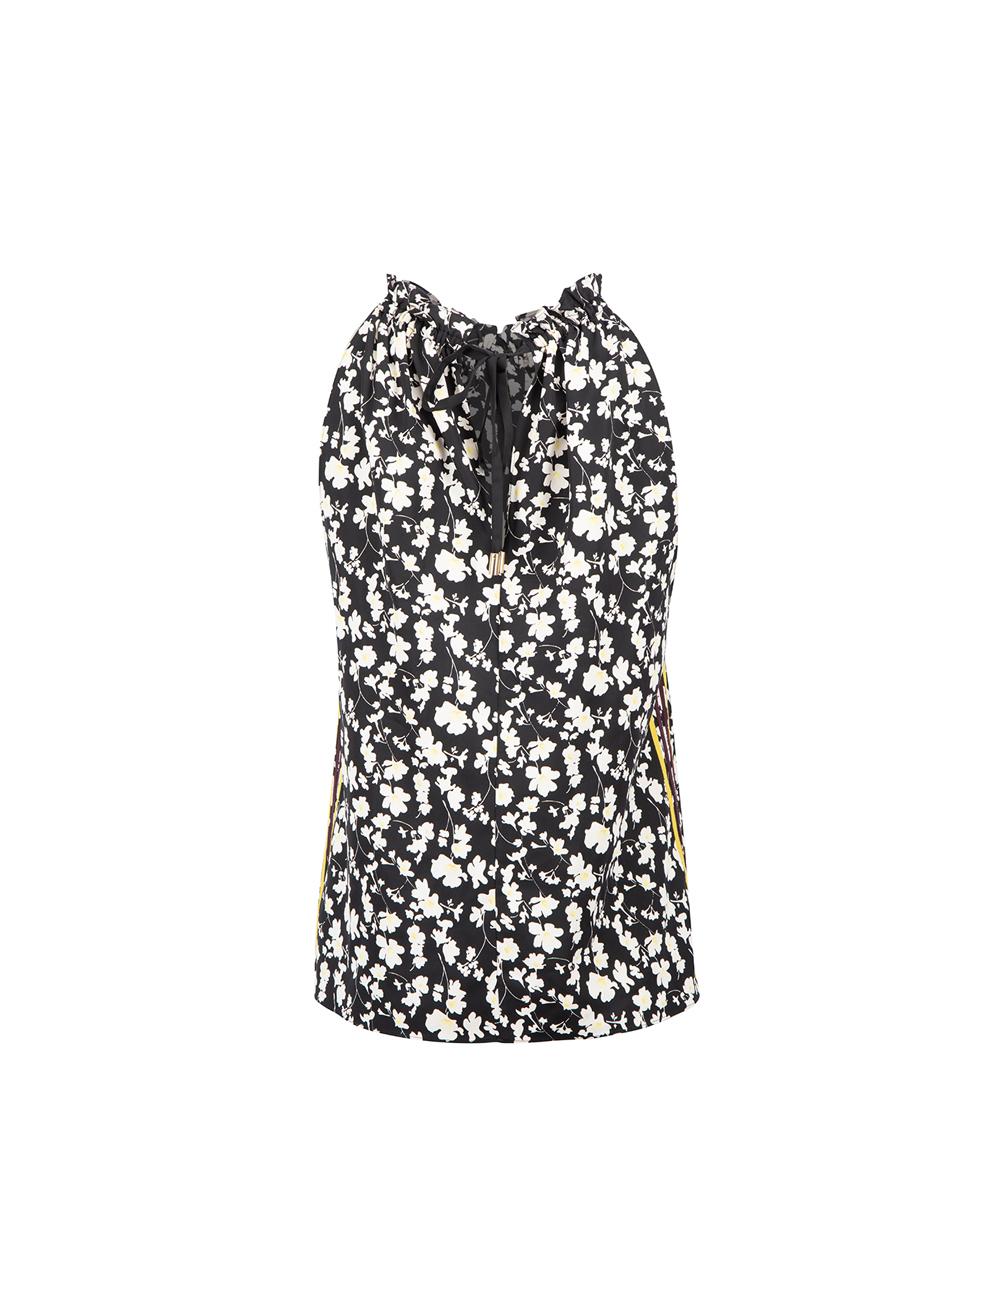 Black Floral Print Halter Neck Sleeveless Top Size L In Good Condition For Sale In London, GB